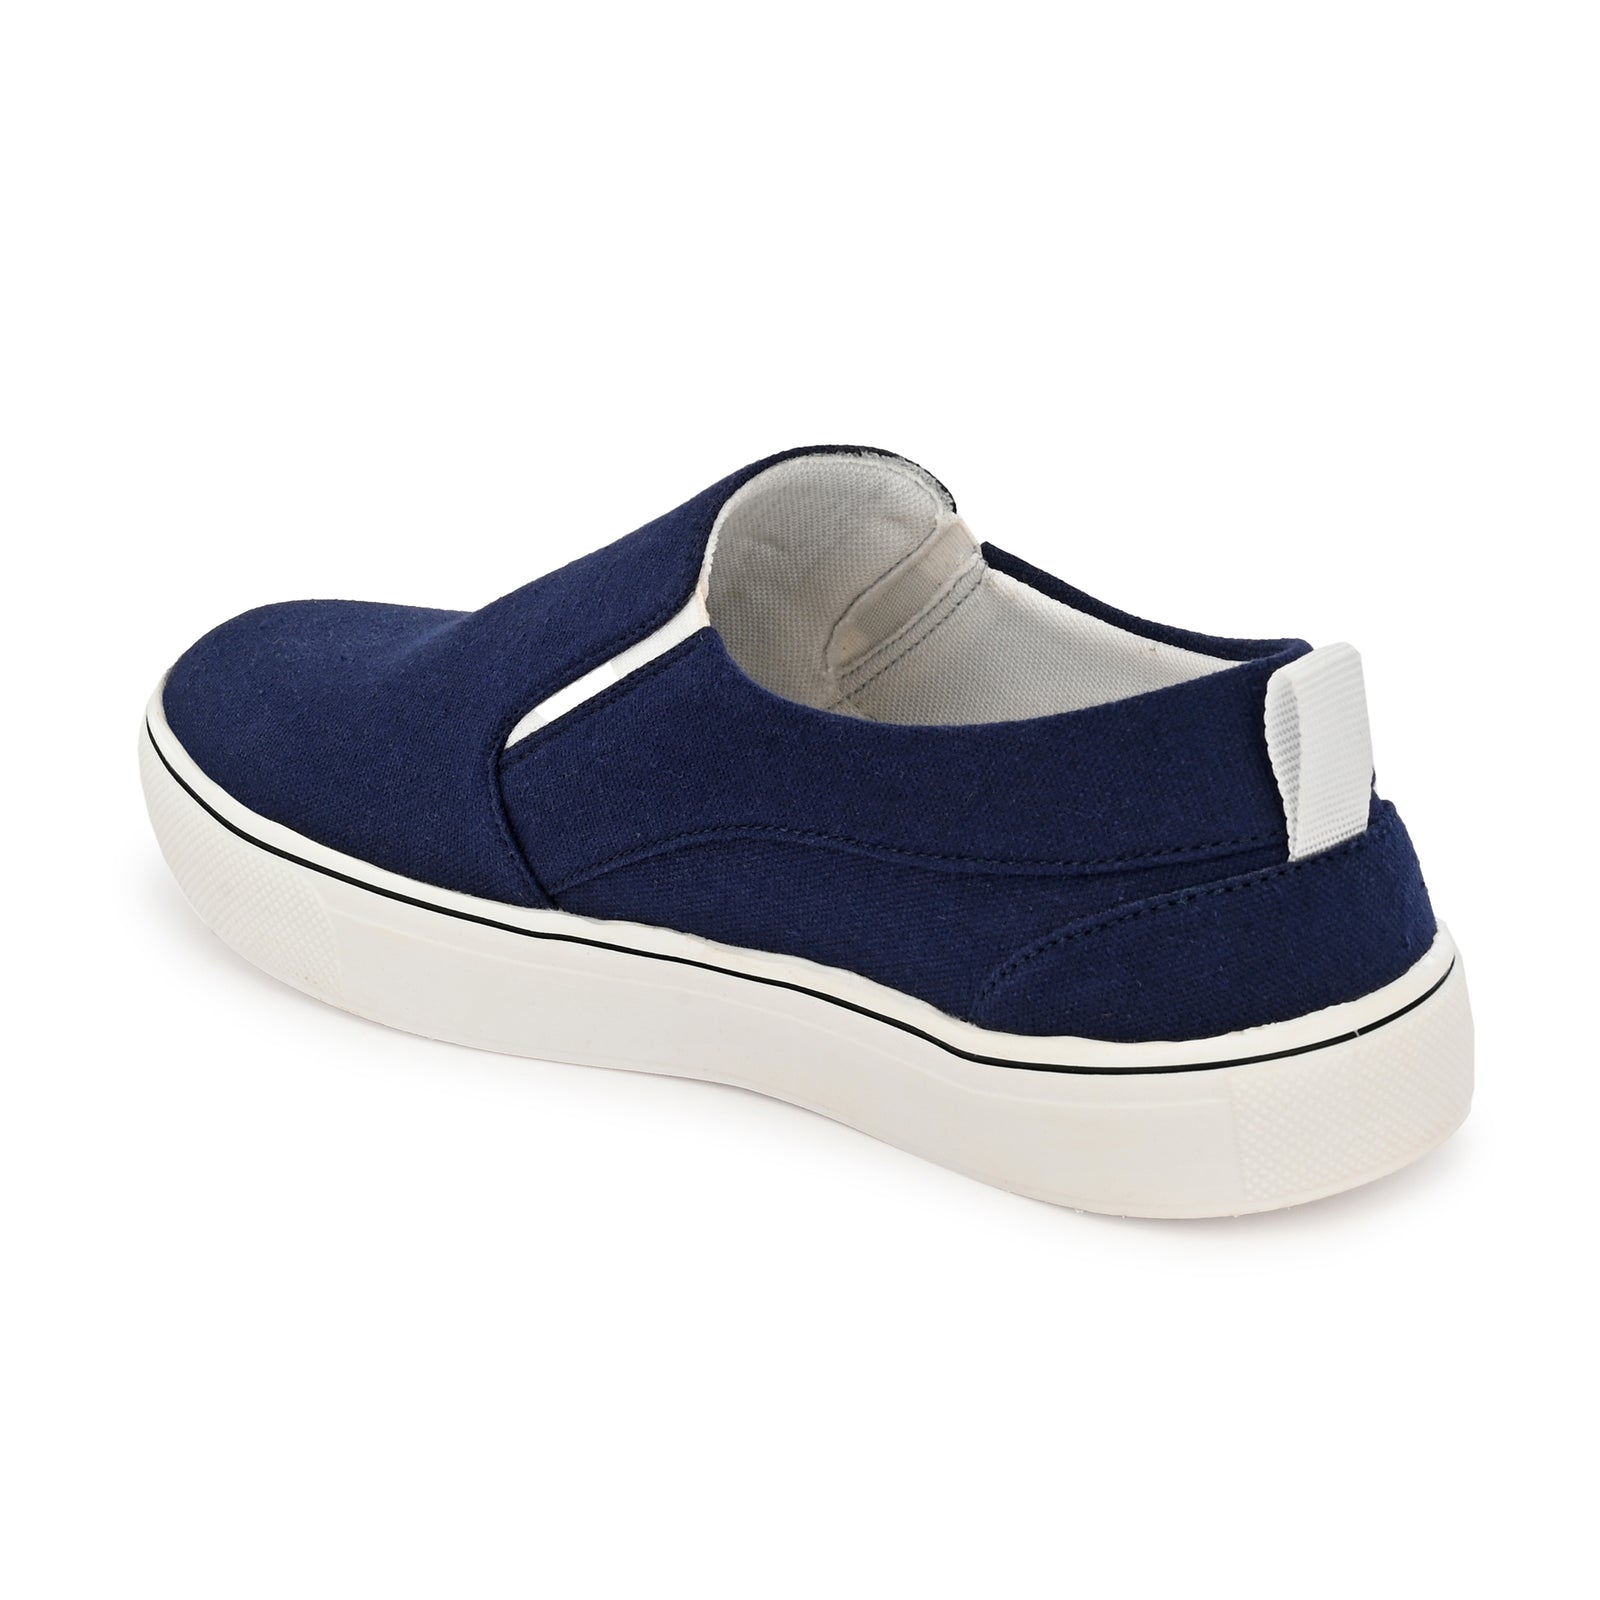 Navy Blue Solid Fabric Slip On Lifestyle Casual Shoes For Men